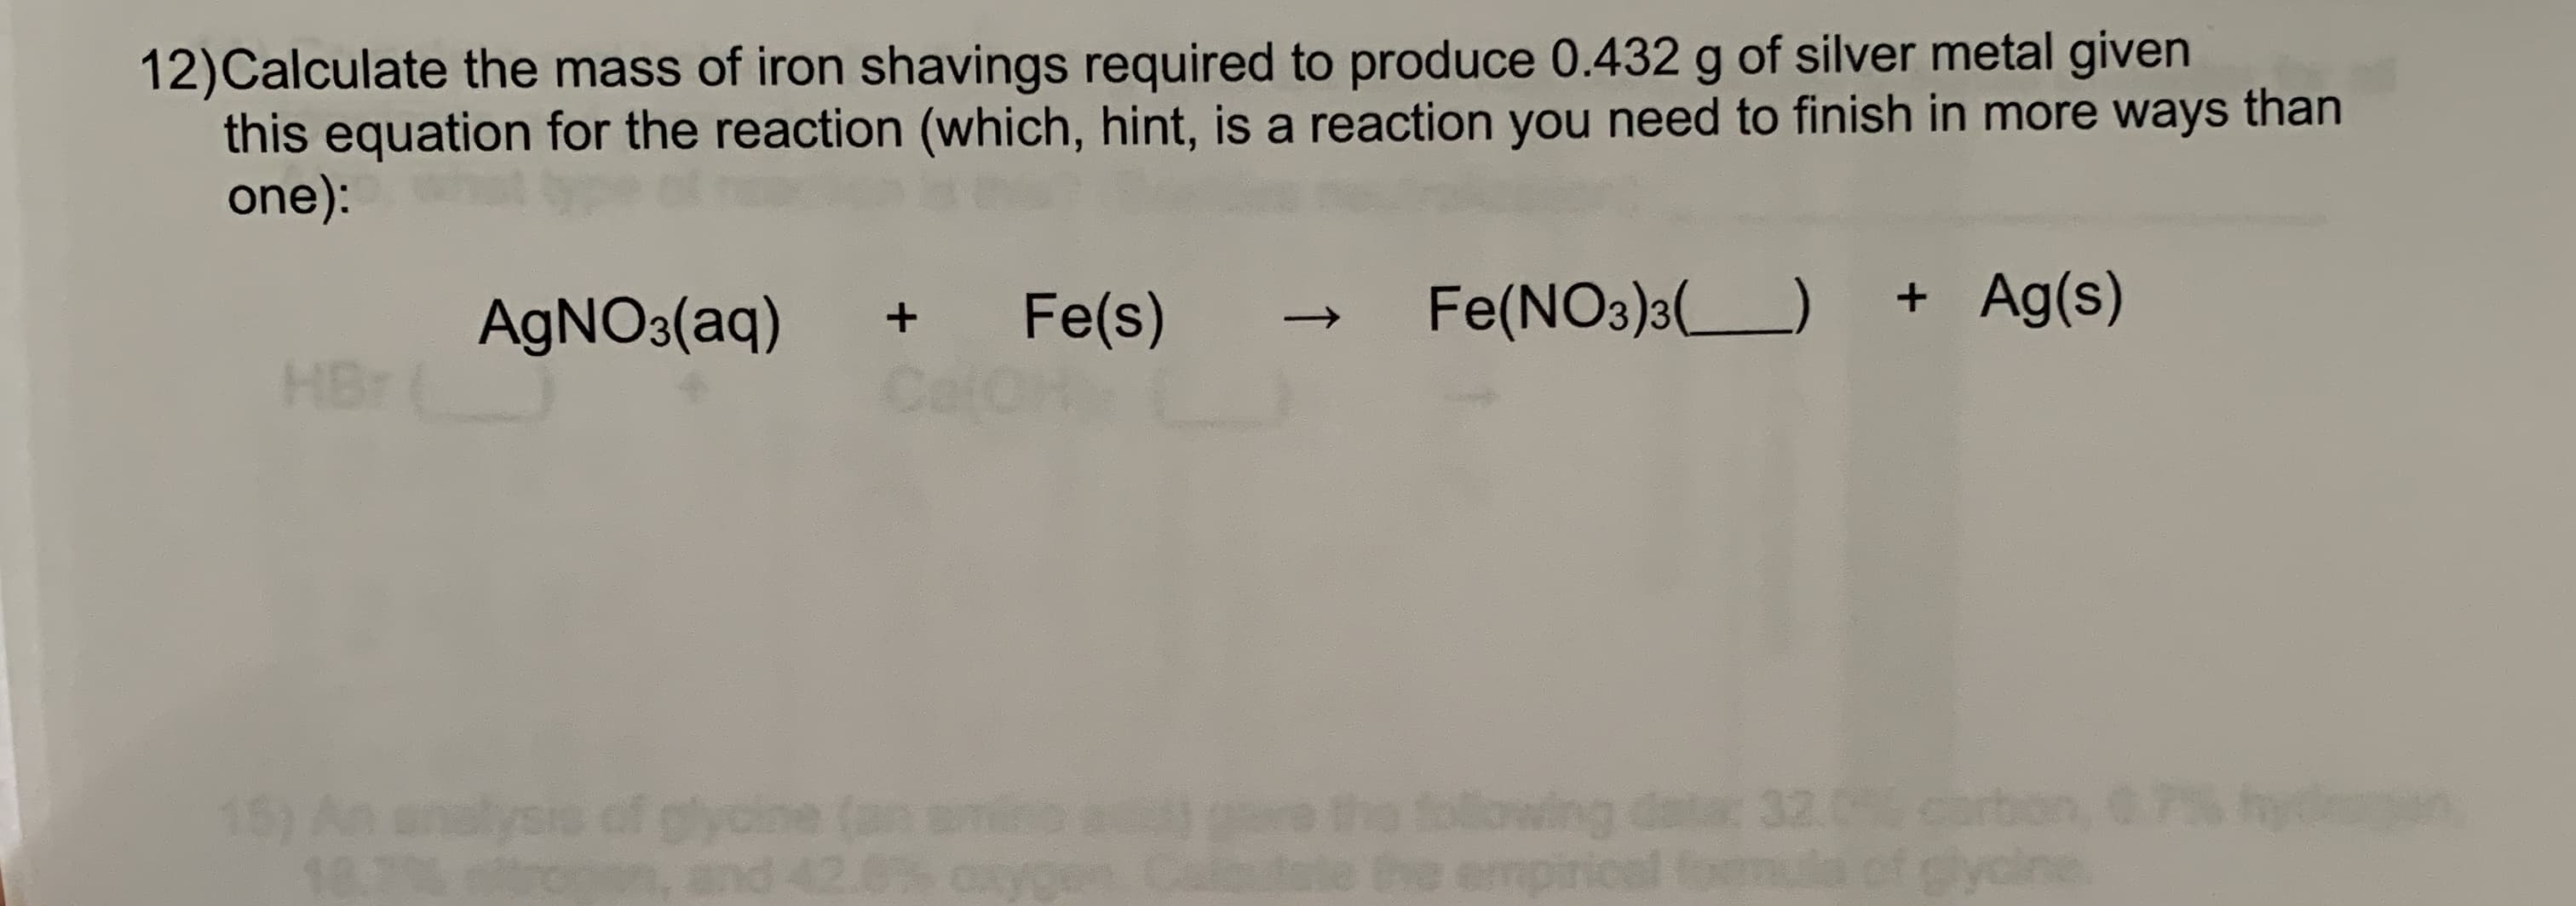 12)Calculate the mass of iron shavings required to produce 0.432 g of silver metal given
this equation for the reaction (which, hint, is a reaction you need to finish in more ways than
one):
Fe(NO3)3()
+ Ag(s)
Fe(s)
Cal
AGNO3(aq)
HBr
following datac 32.0 carbon,
emp
15) An
gycin
and
lysi
18.7
mula of glycine.
↑
